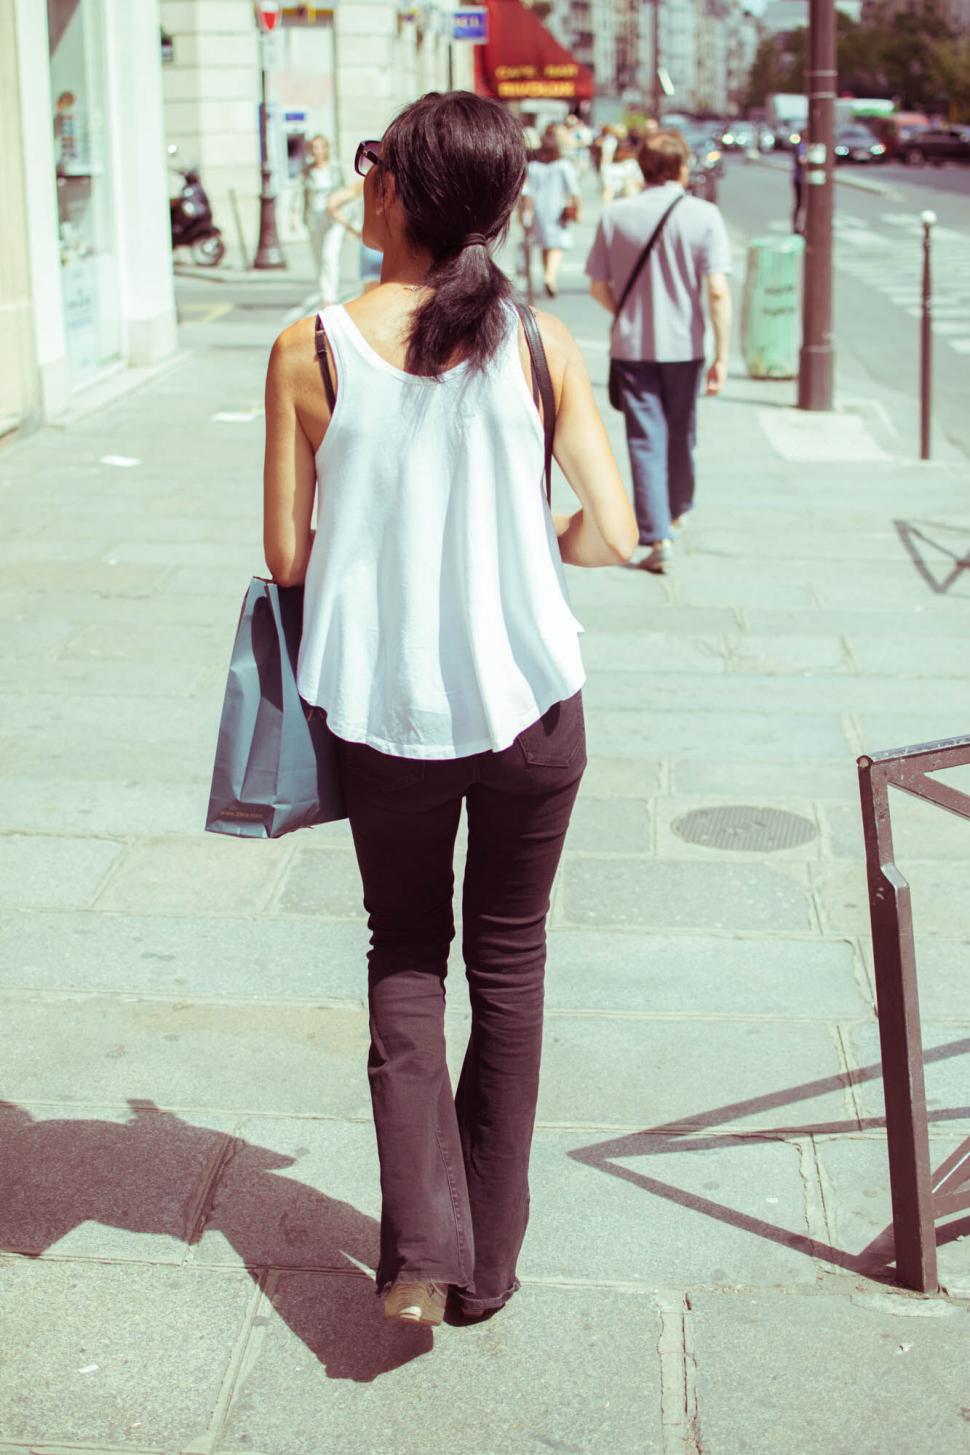 Free Image of Woman walking with shopping bag in city 